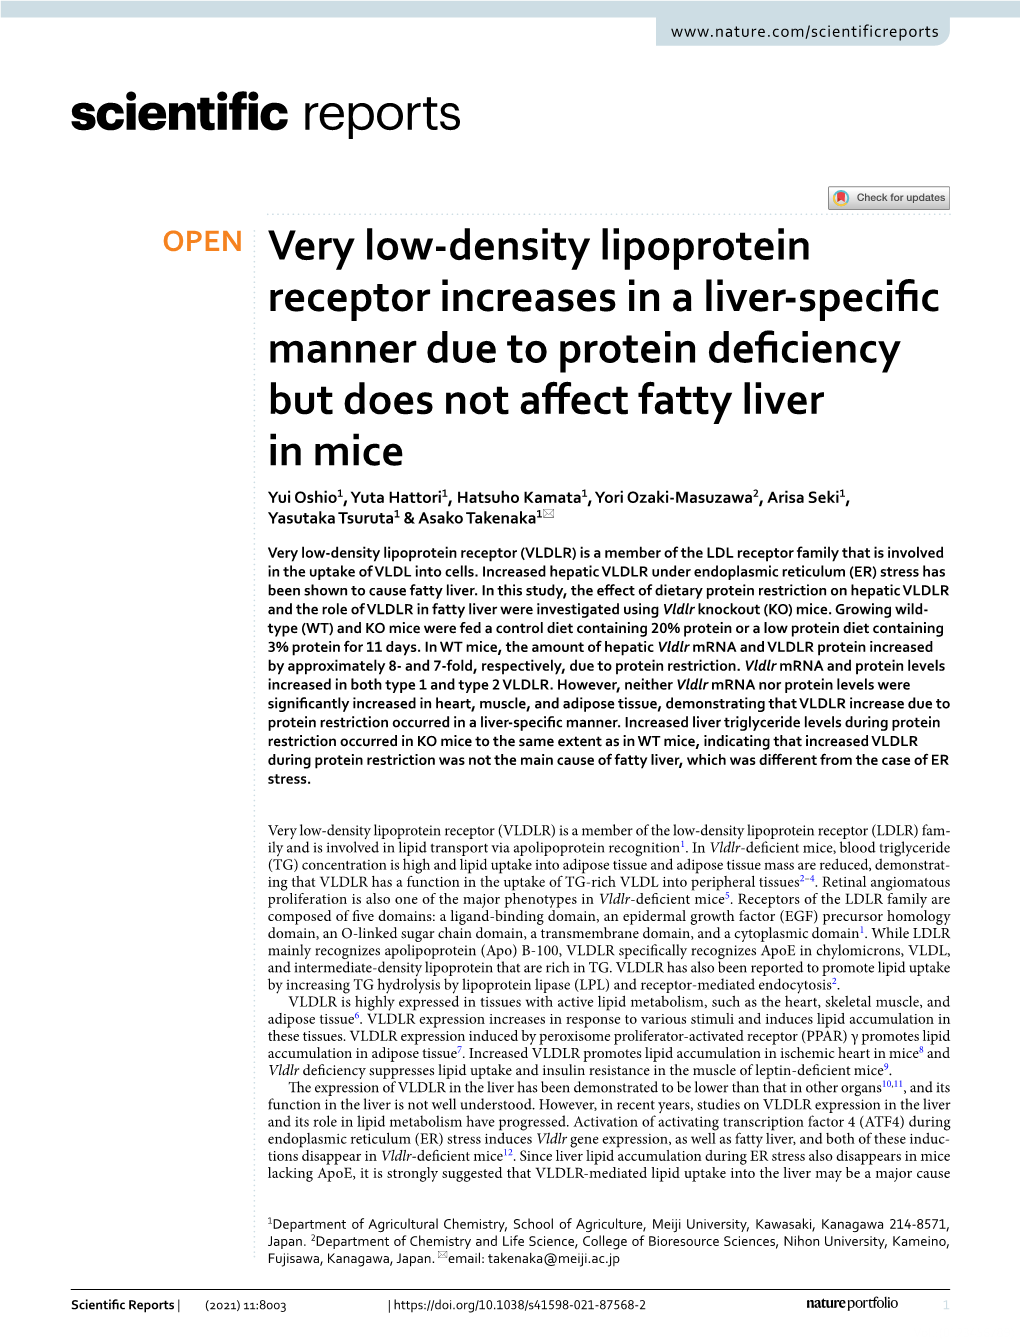 Very Low-Density Lipoprotein Receptor Increases in a Liver-Specific Manner Due to Protein Deficiency but Does Not Affect Fatty L